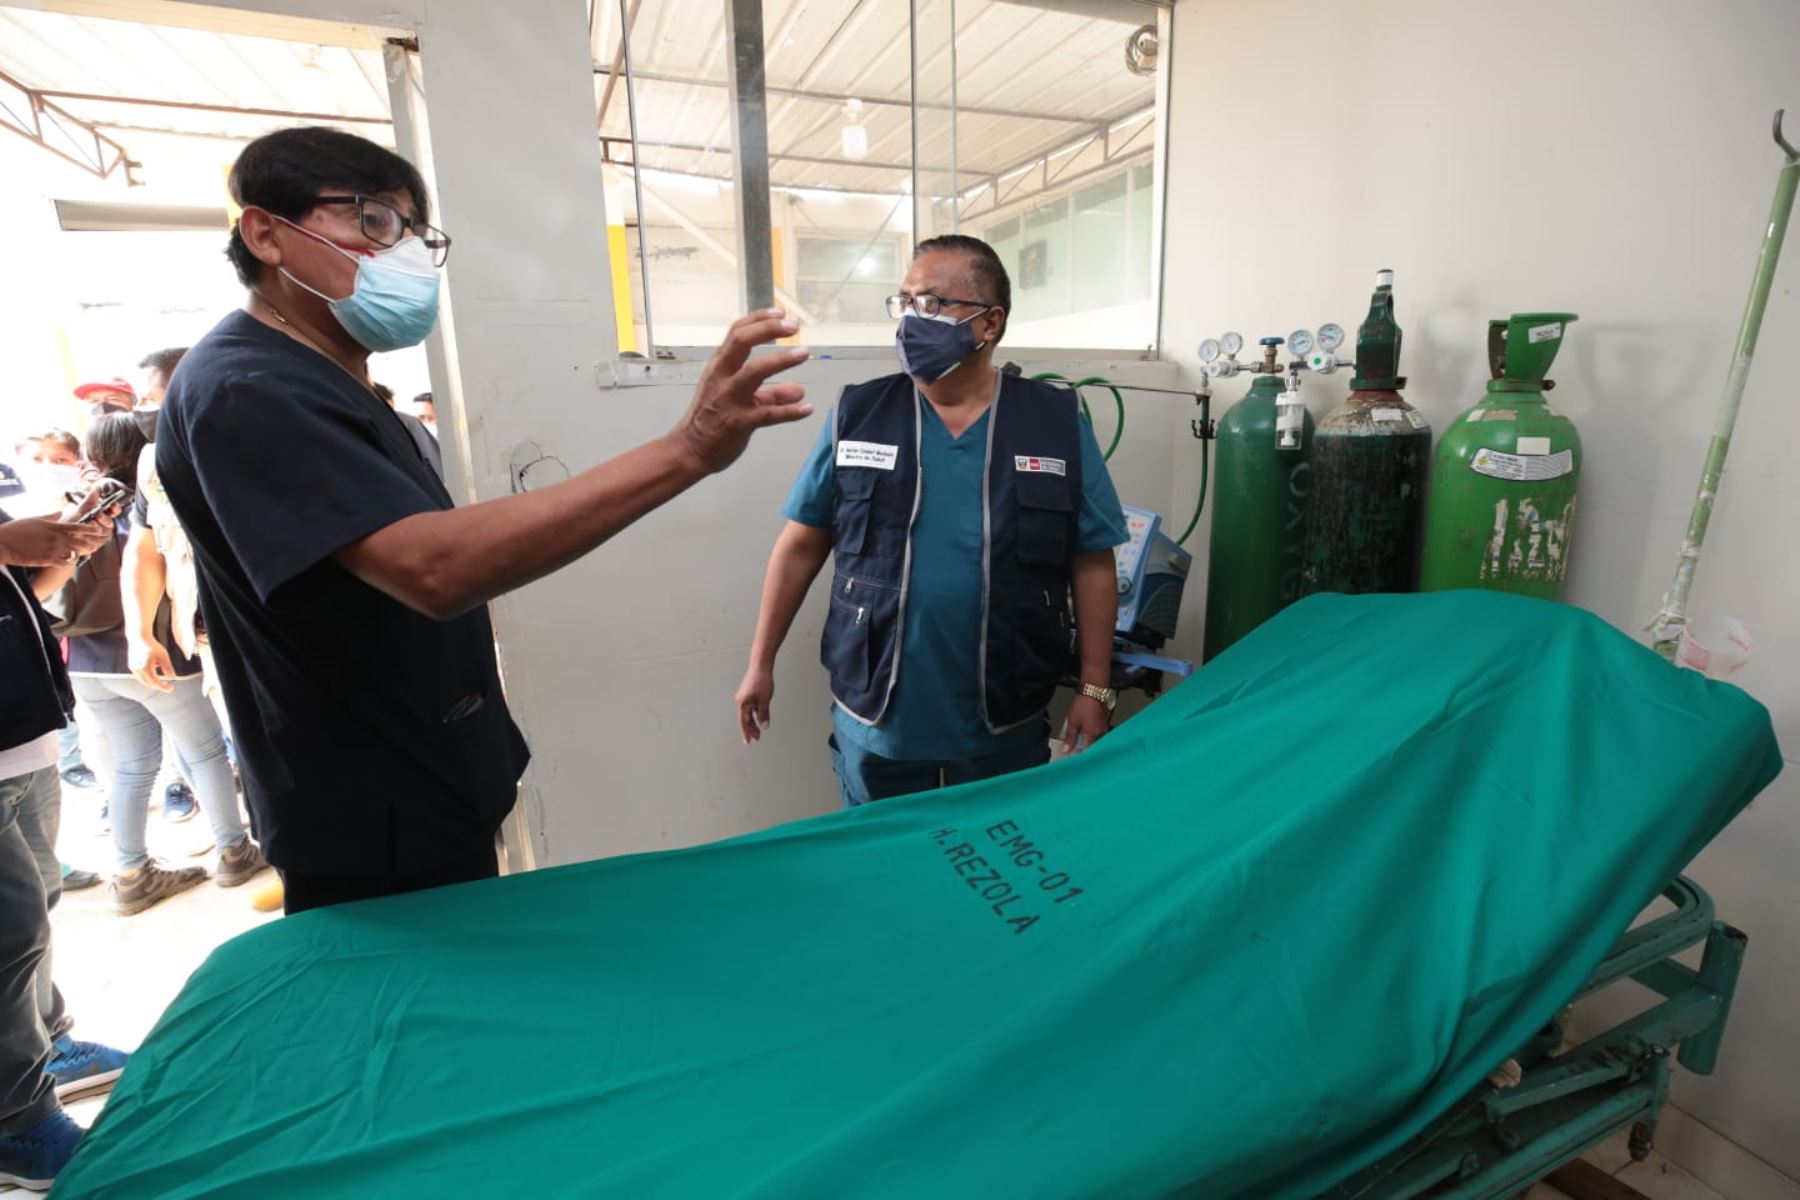 The Minister of Health, Hernan Condori Machado, made an unexpected visit to the Risola Hospital in Canet.  The Minsa chief responded to the demands and needs of health workers and also toured hospital facilities to learn about their current situation.  Photo: Mensa